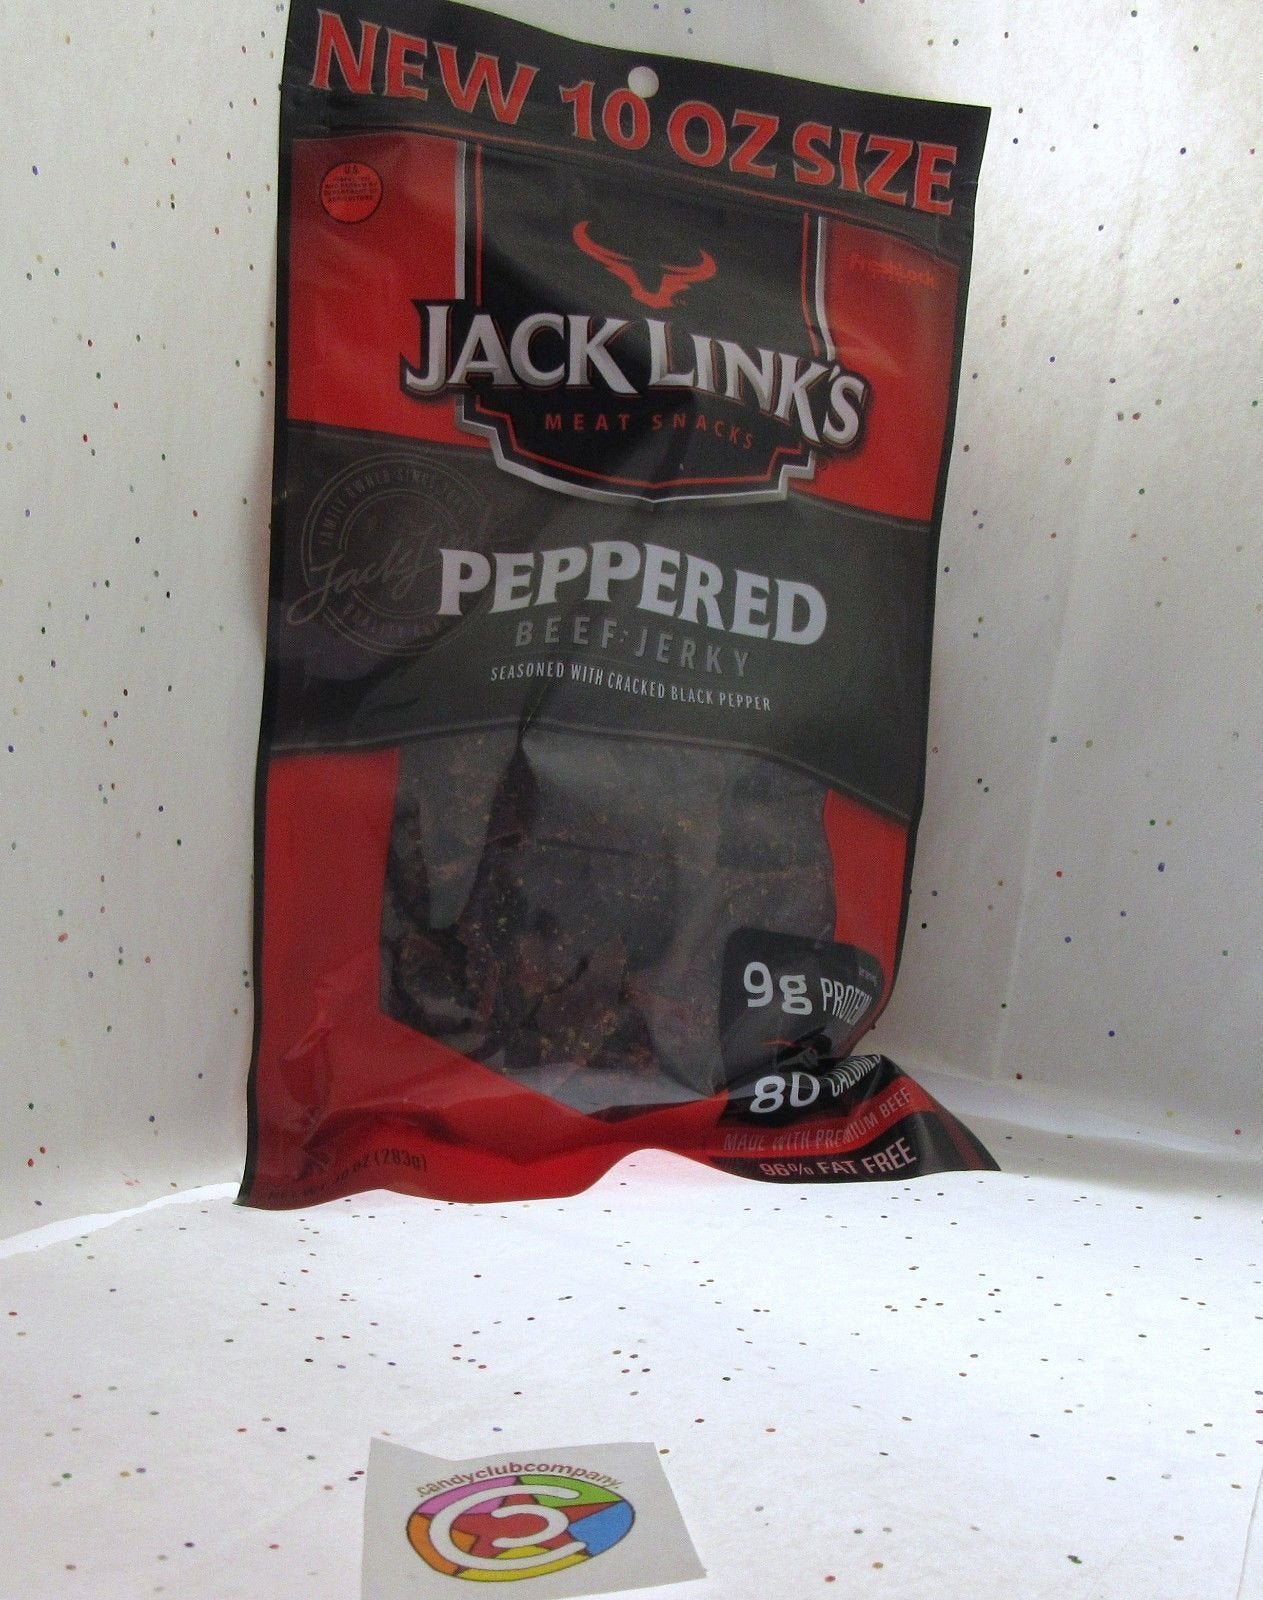 Jack Link's Peppered Beef Jerky -10 oz. Dried Smoked Meat Snack